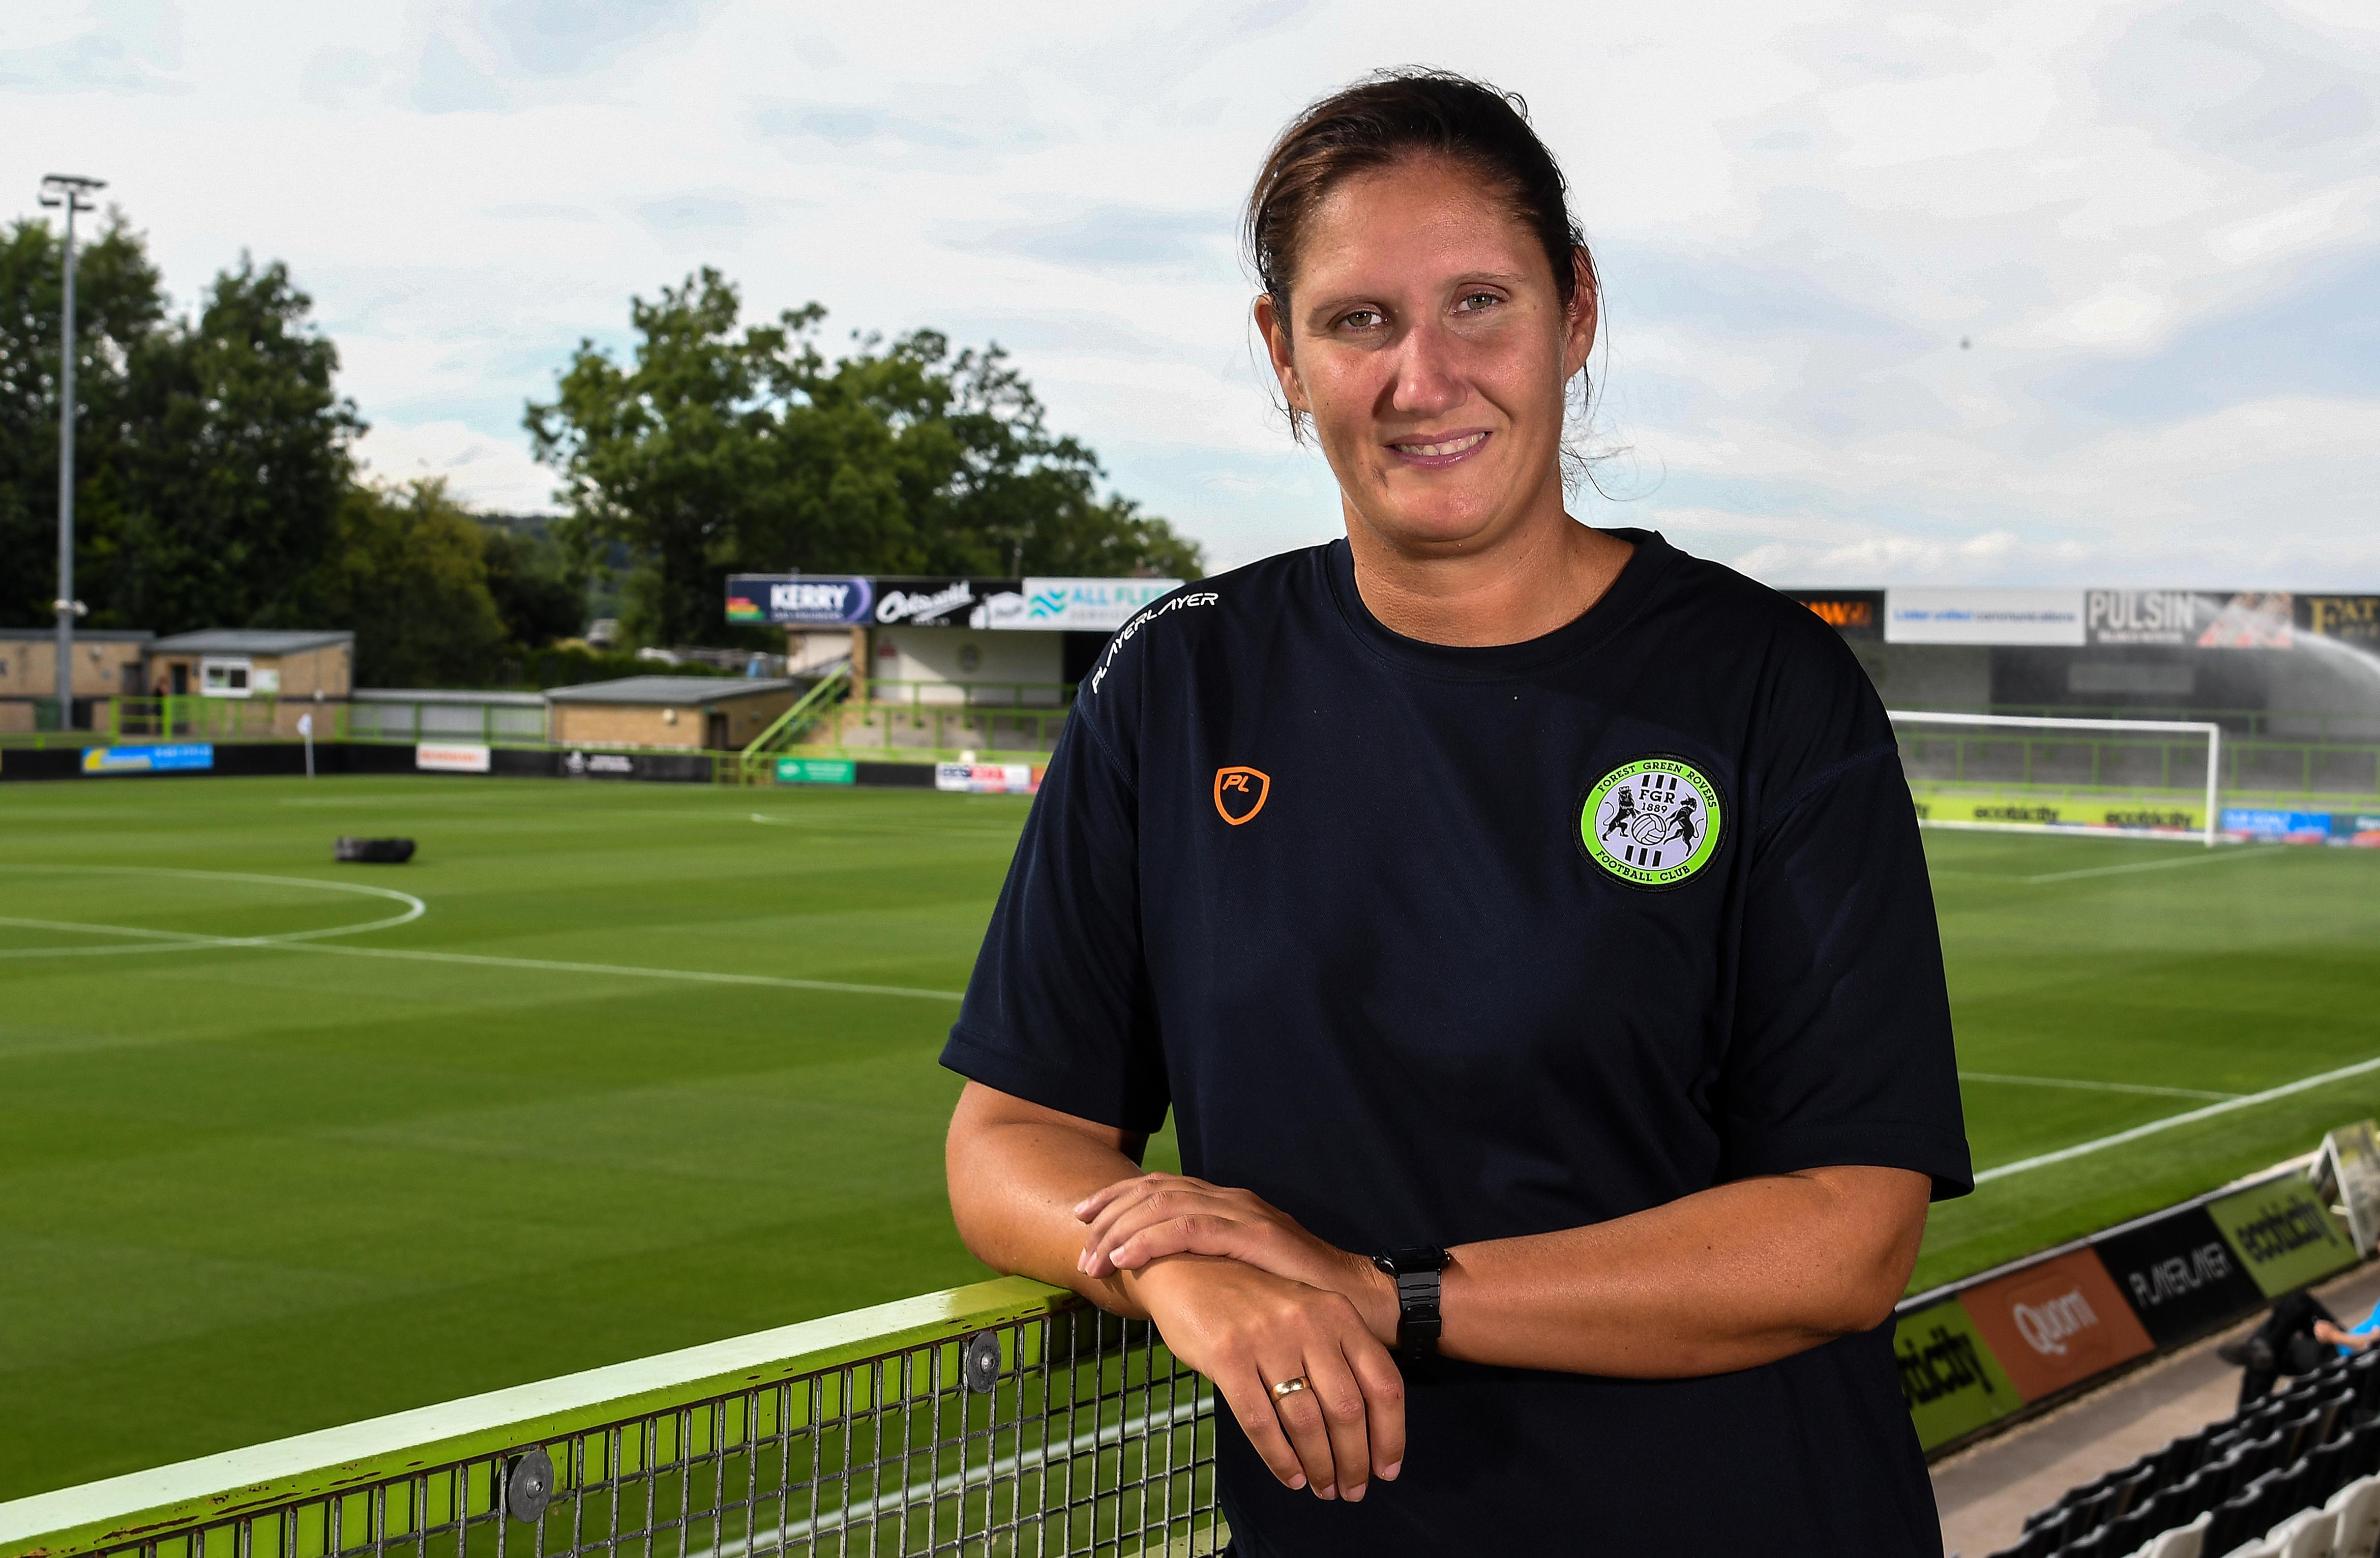 Hannah Dingley Becomes First Woman to Coach Men's Football Team in England